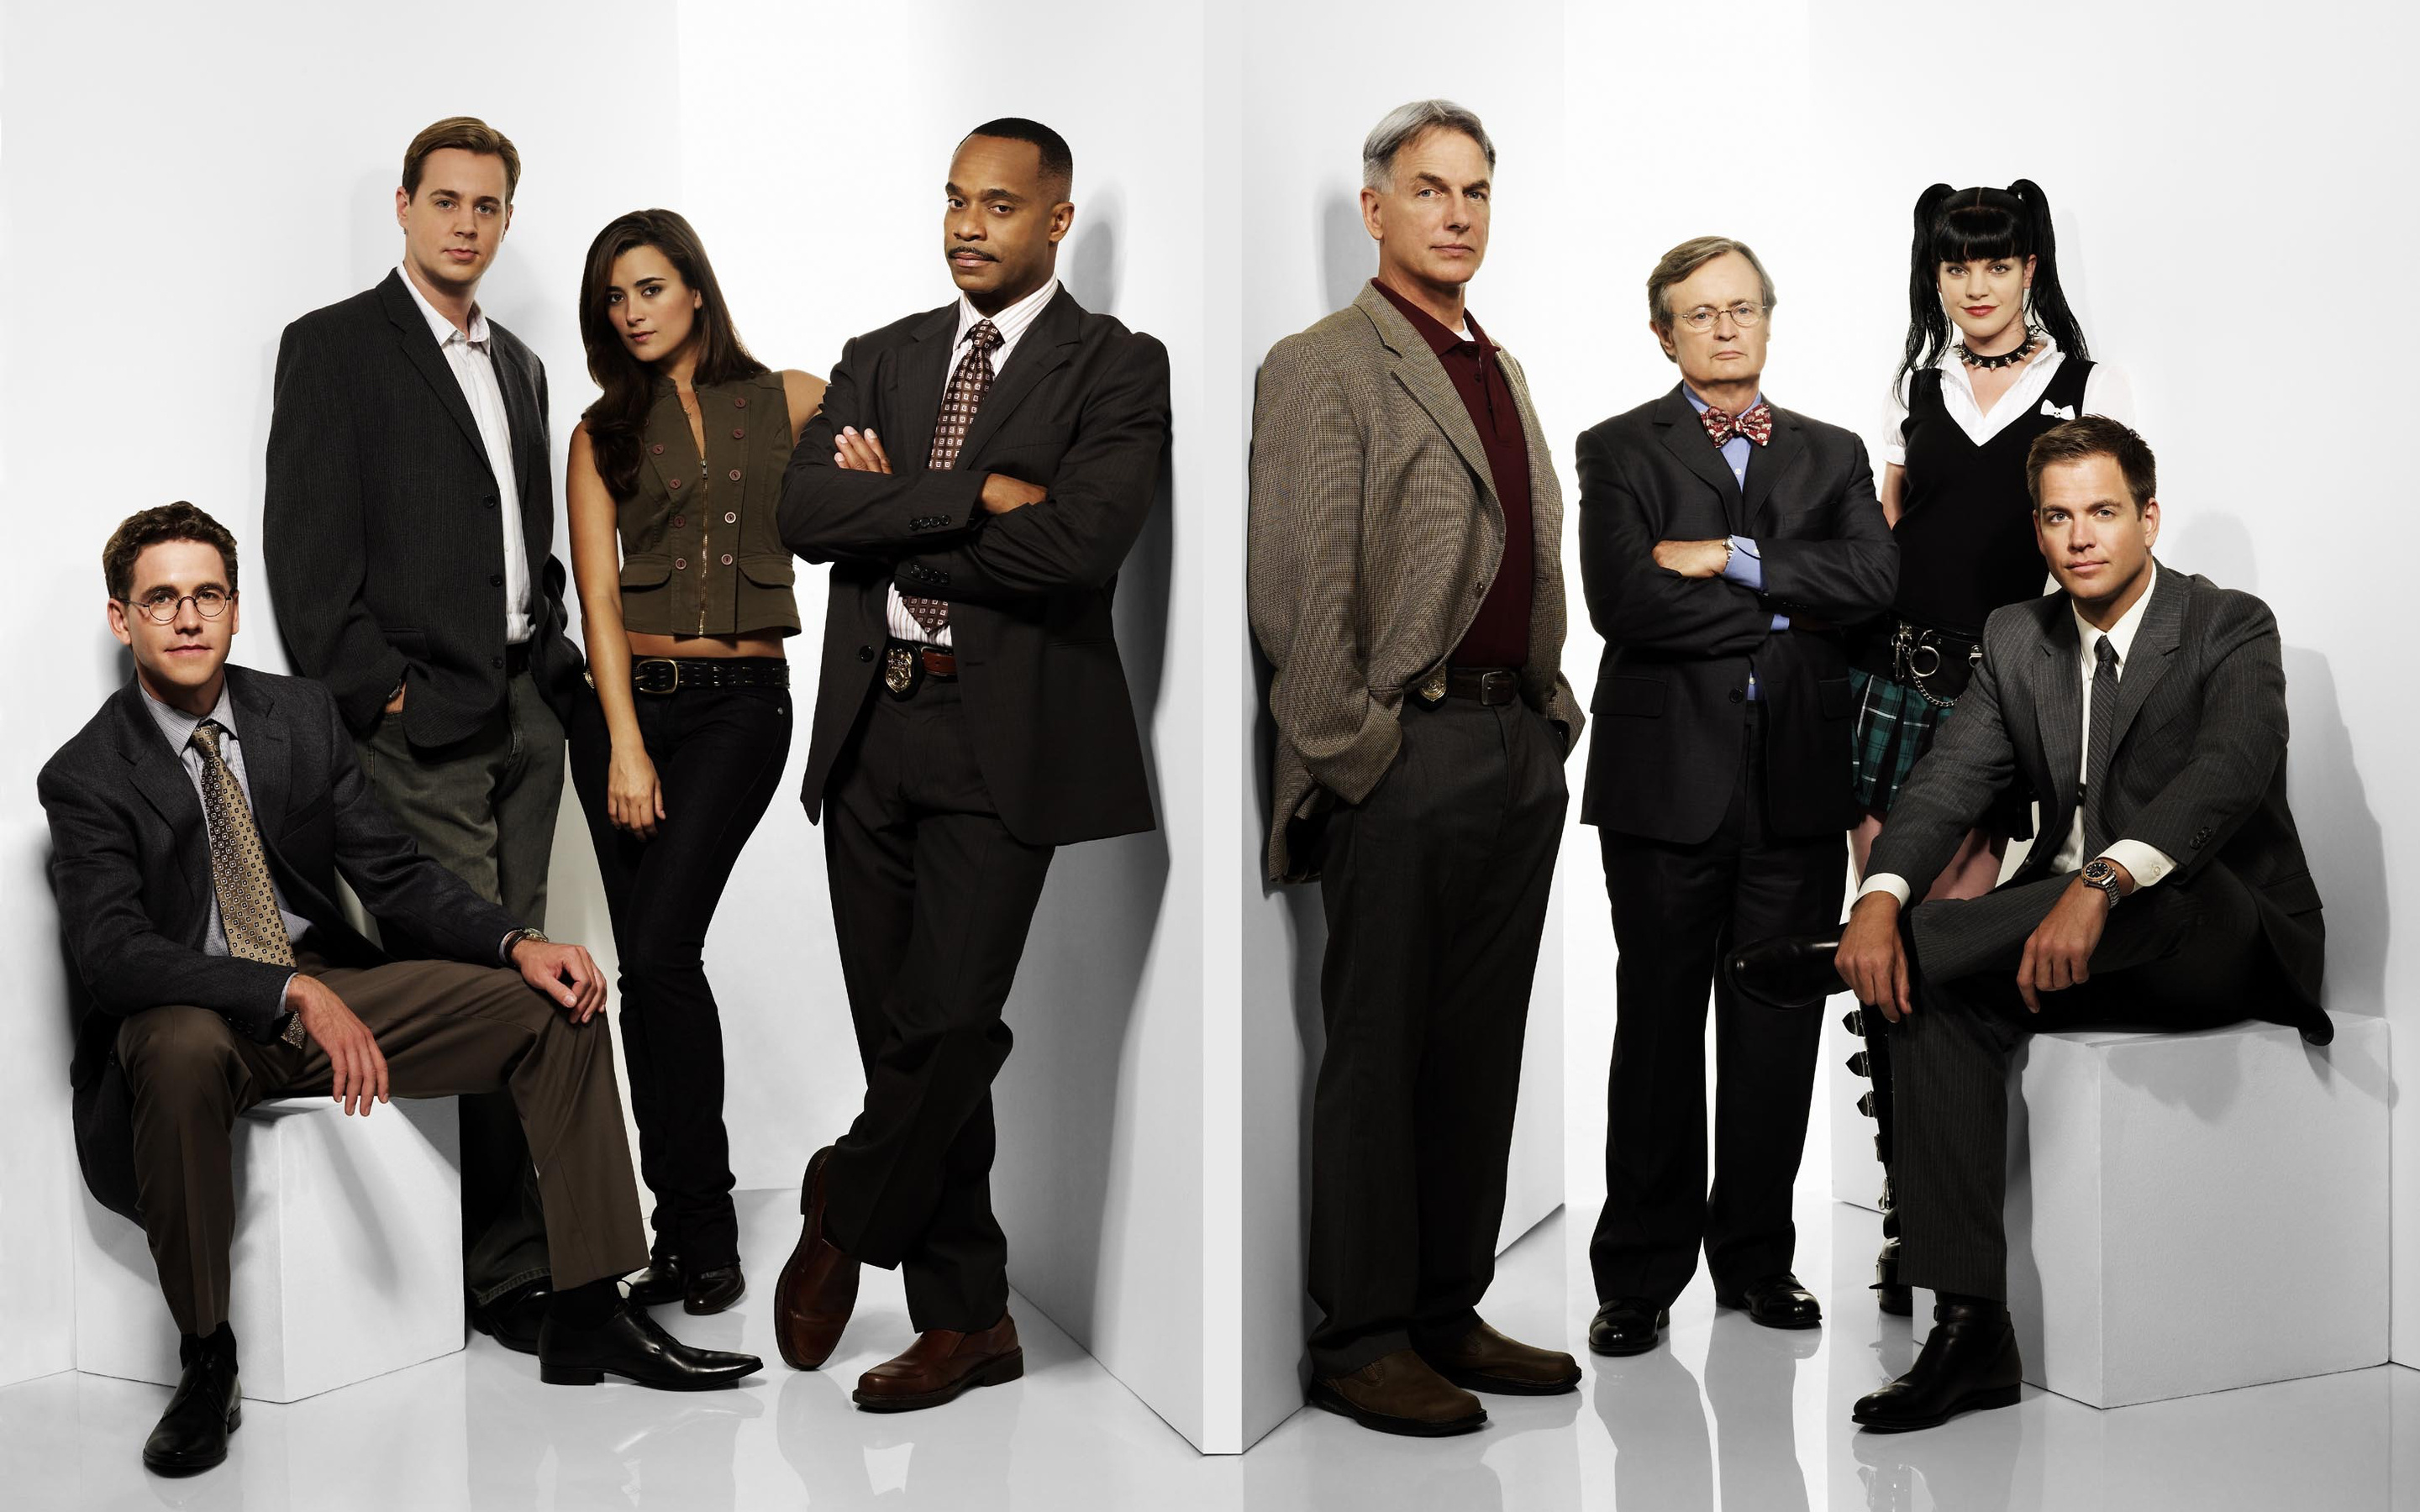 NCIS: Naval Criminal Investigative Service: A runaway hit, Debut in 2003, CBS’s NCIS, Crime, The major lead roles. 2880x1800 HD Wallpaper.